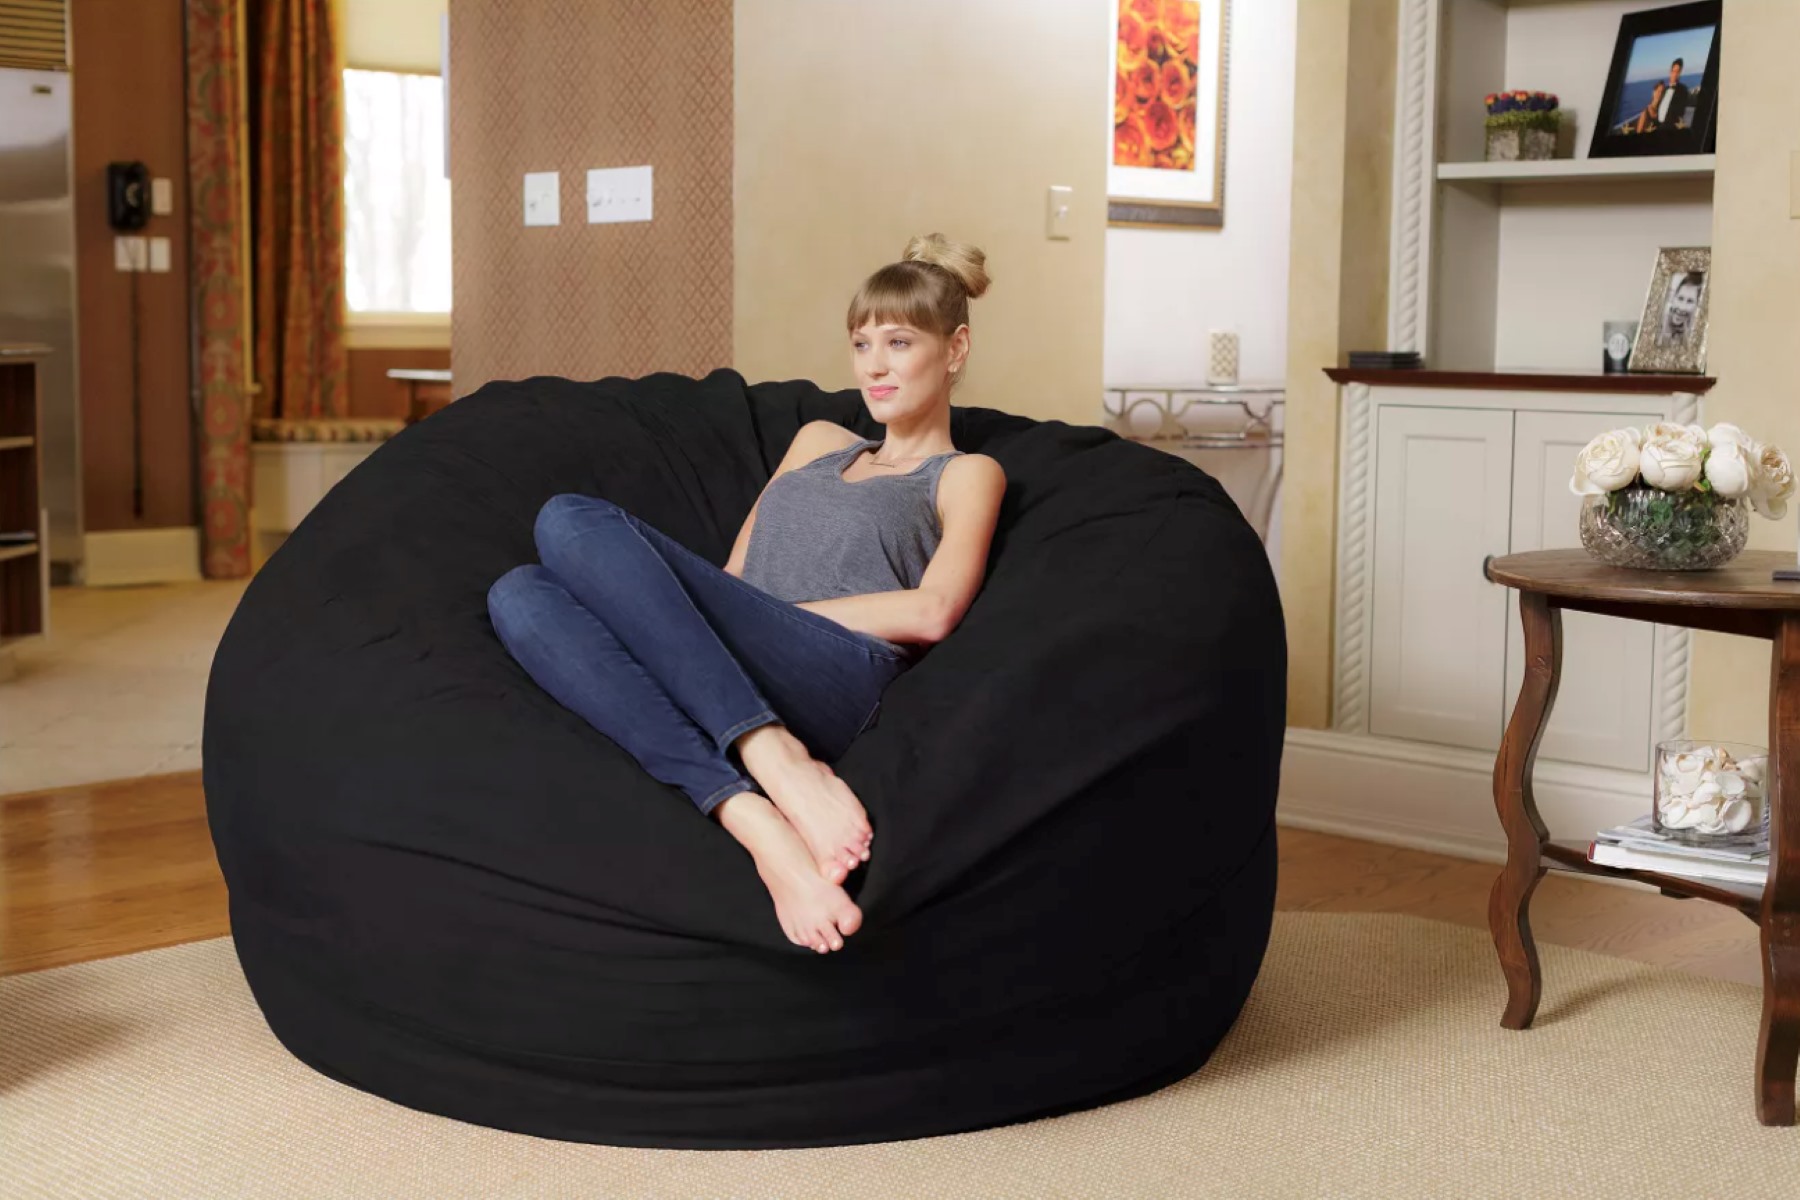 Who Makes The Best Bean Bag Chairs